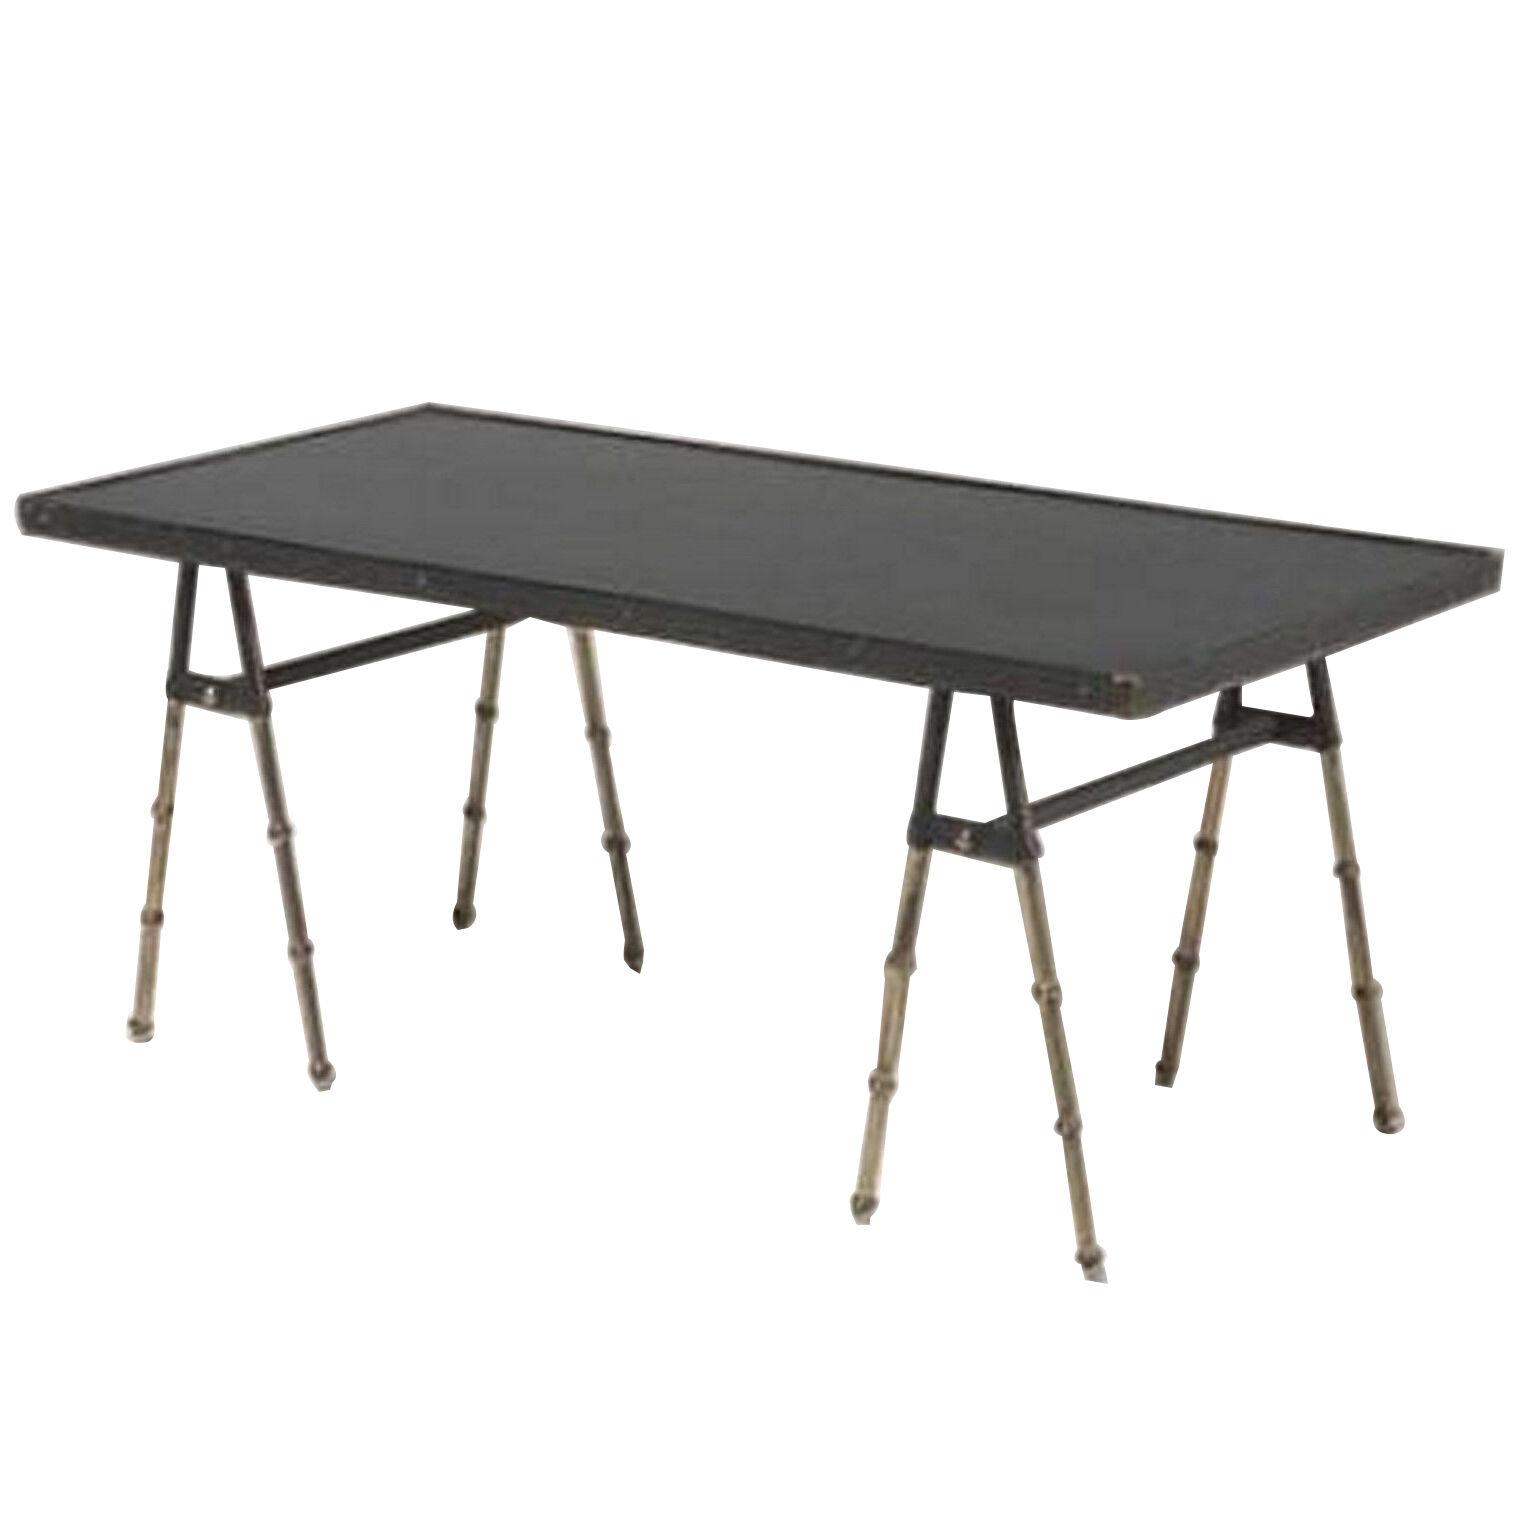 Mid Century Modern stitched leather and brass coffee table by Jacques Adnet.